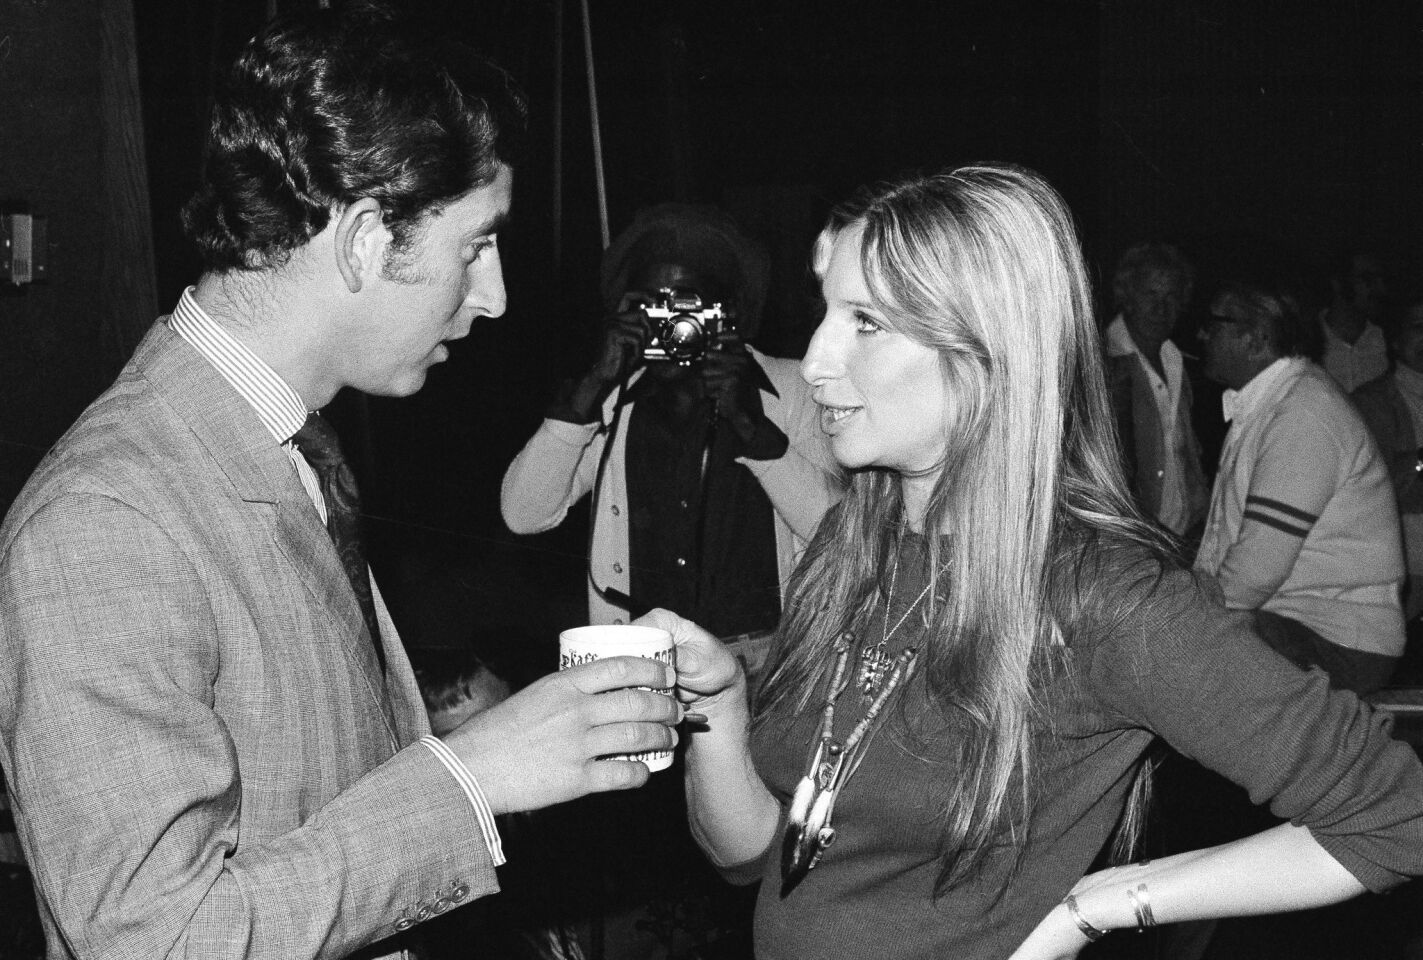 Barbra Streisand offers a cup of coffee to Prince Charles as they chat on a set at Warner Bros. studio in Los Angeles on March 19, 1974. The Prince is visiting Southern California while his ship is docked in San Diego.